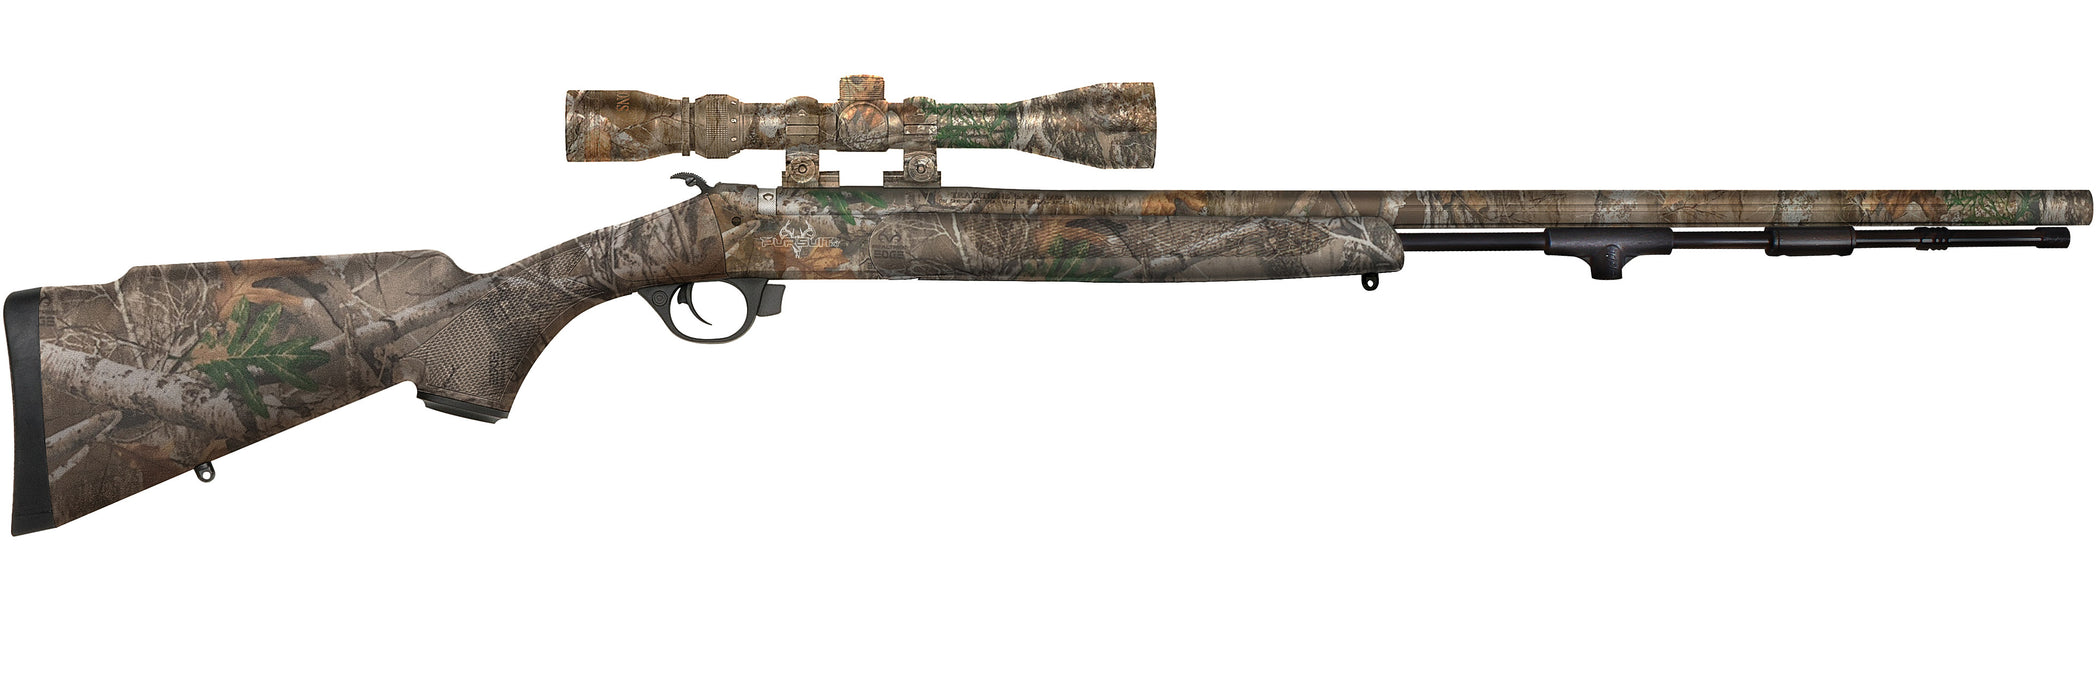 Traditions™ Pursuit VAPR™ XT - .50 Cal Full Camo Scope Package - R67-744404421